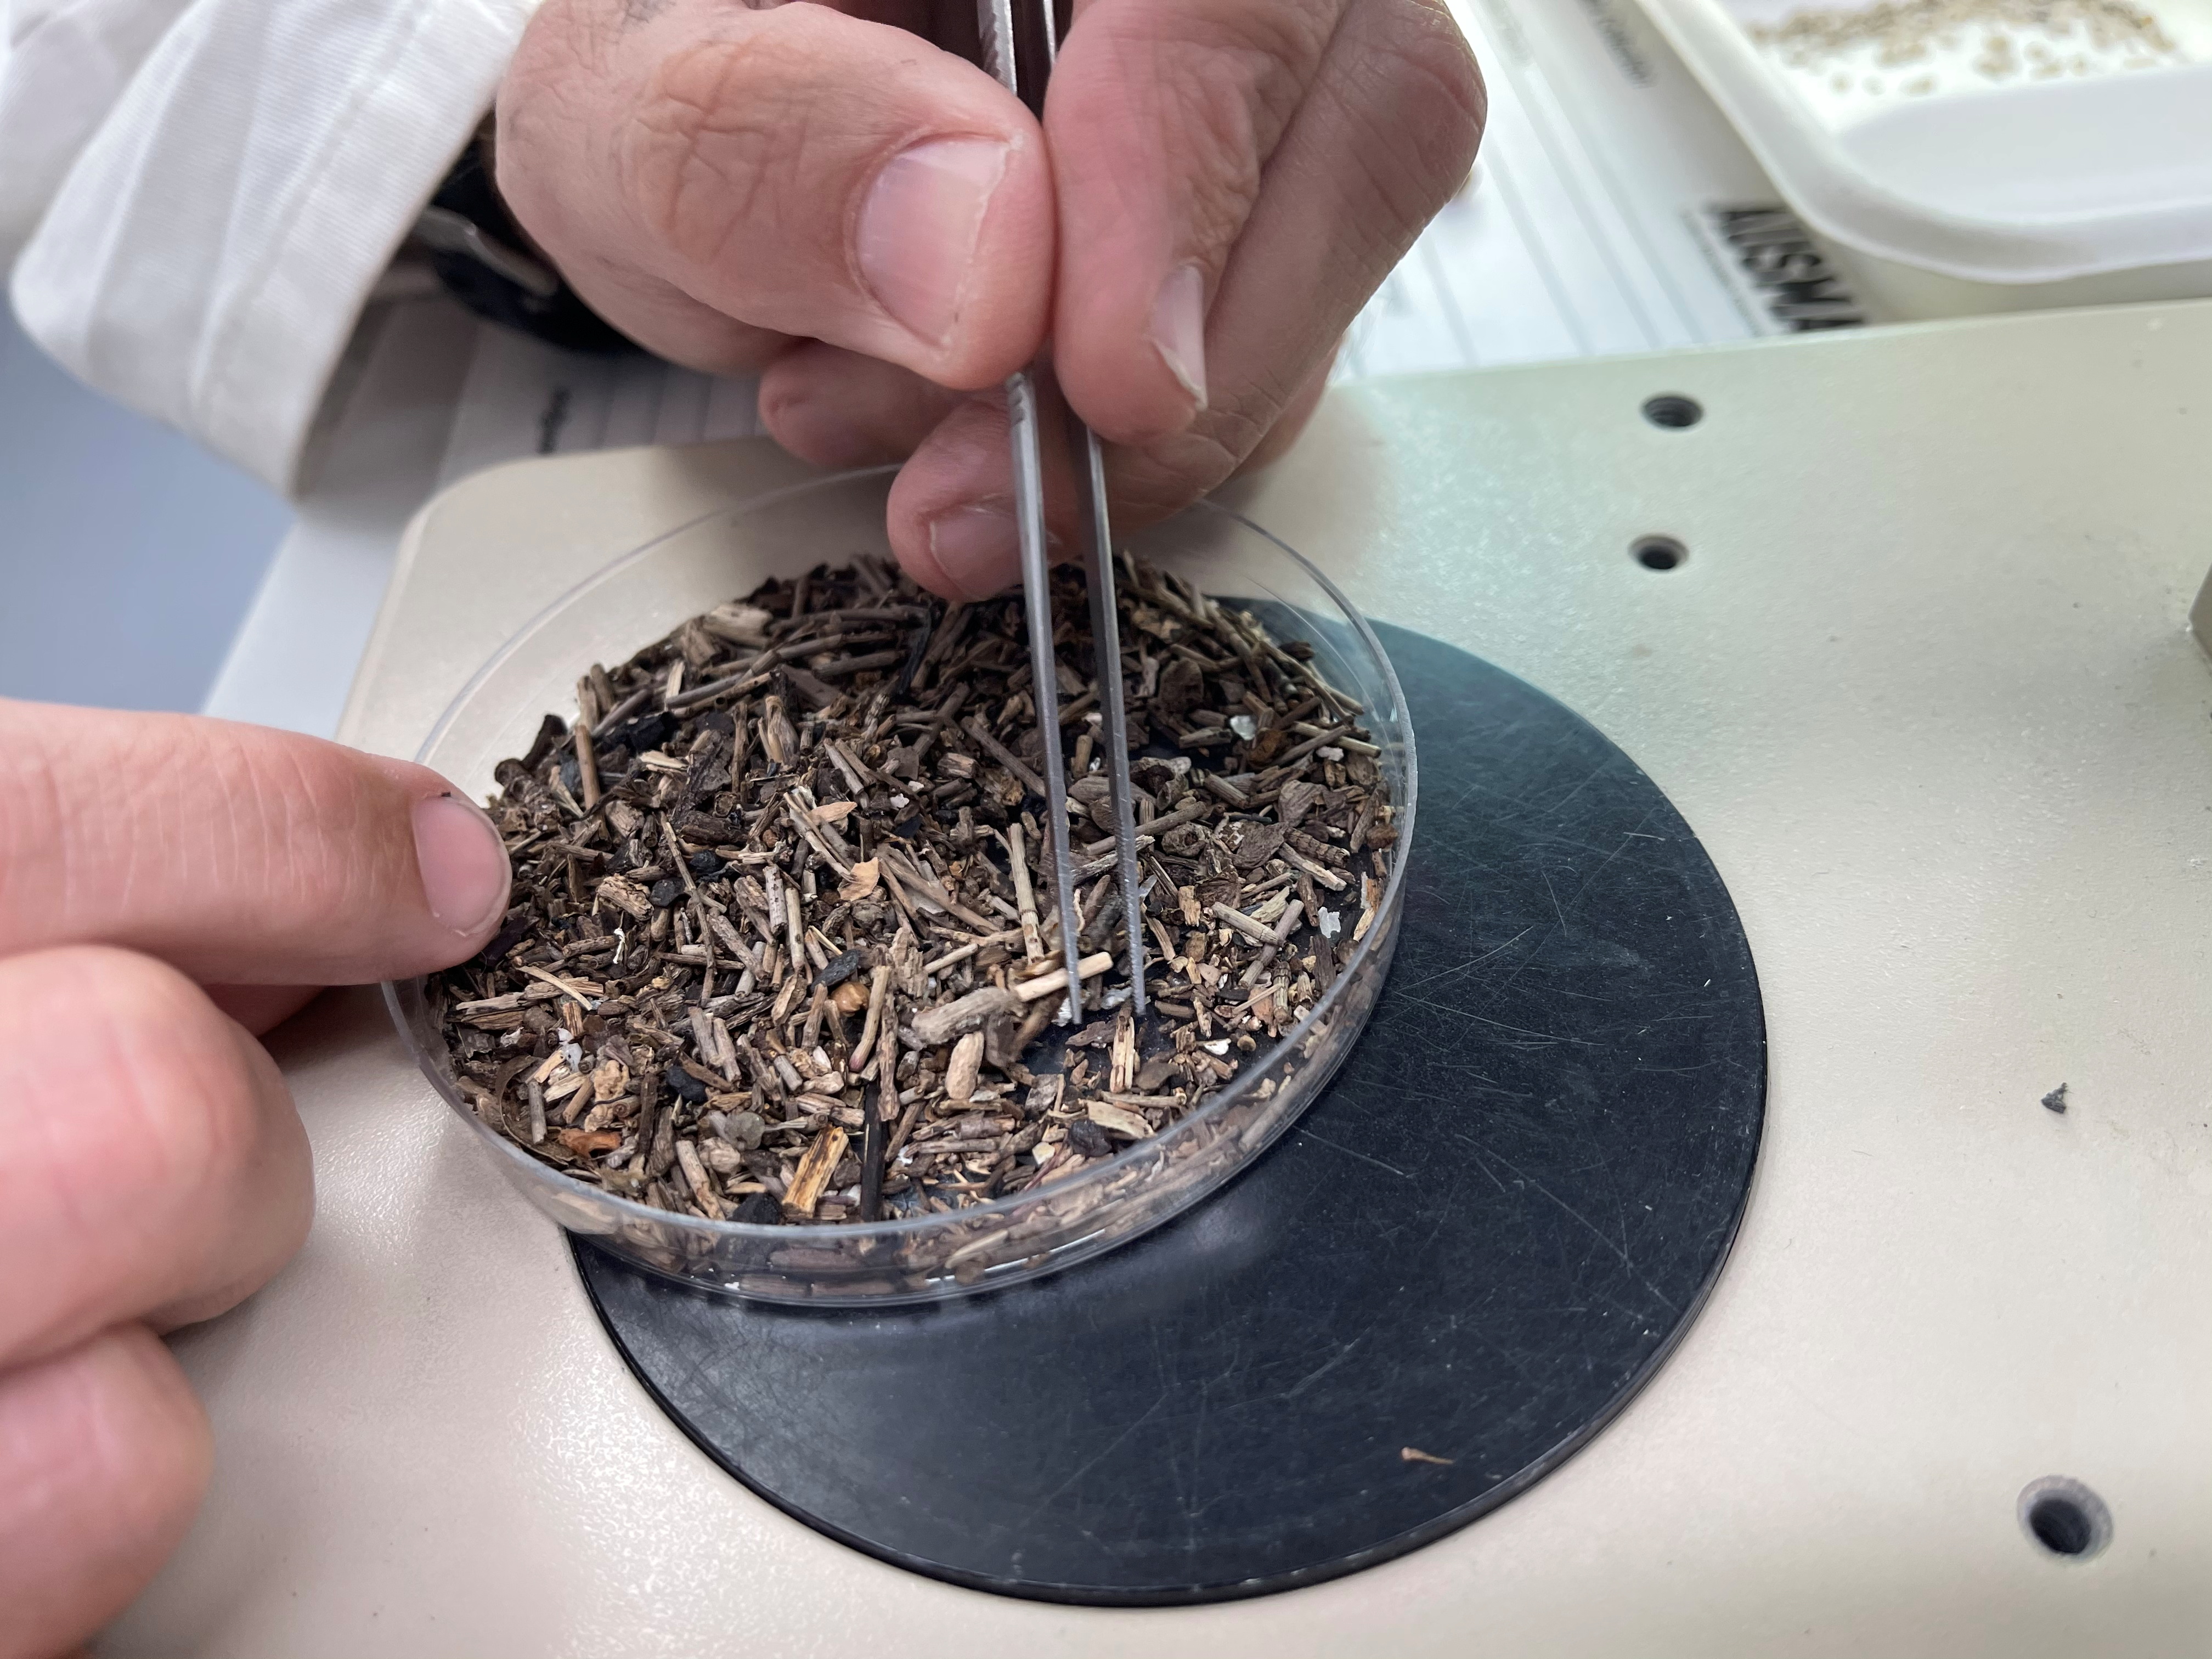 Australian Microplastic Assessment Project Research Director Dr Scott Wilson uses tweezers to find microplastics at Macquarie University in Sydney